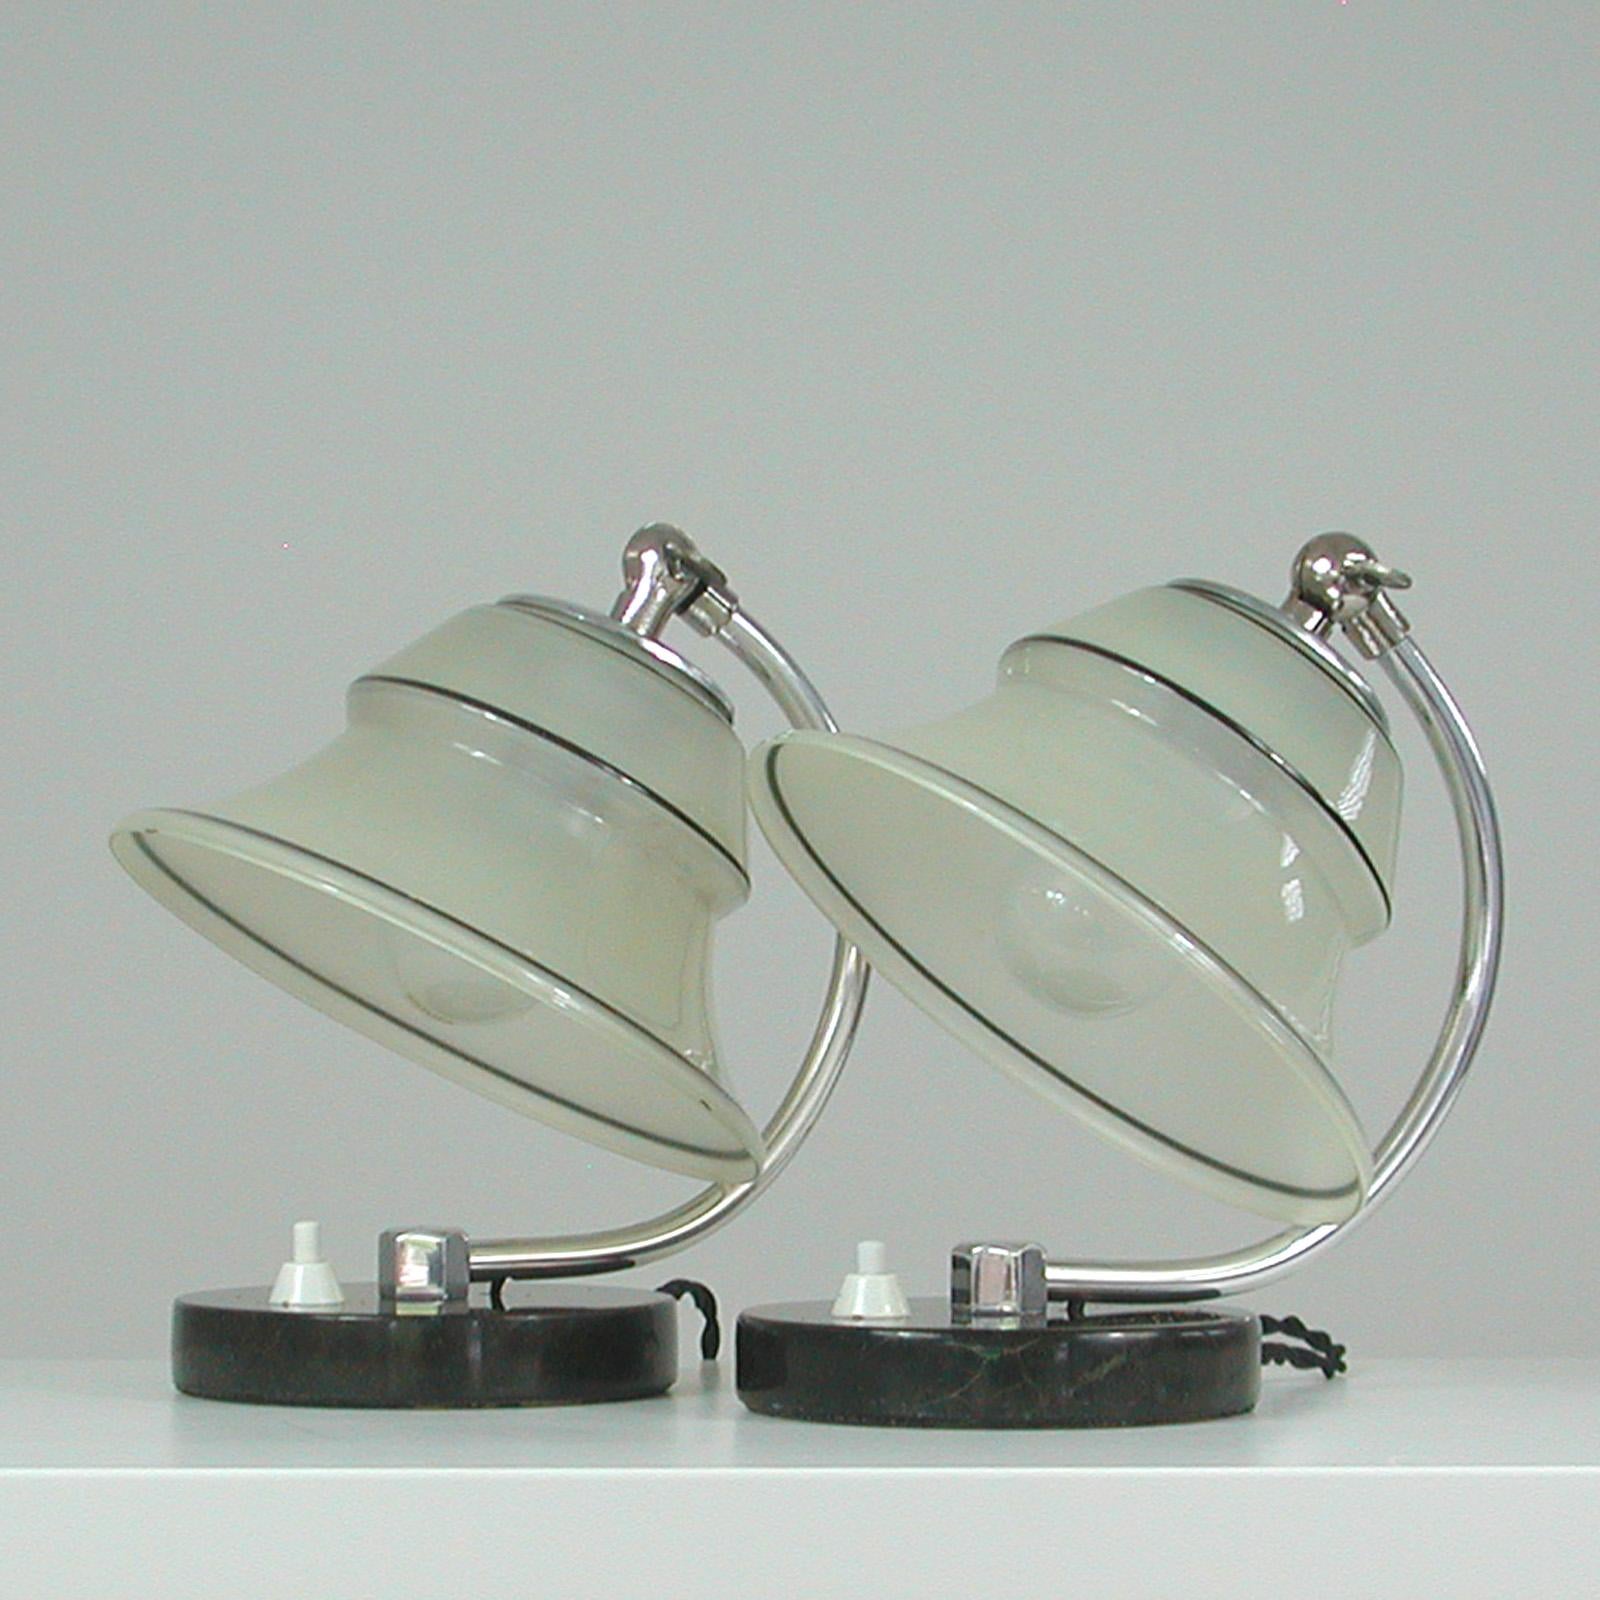 Mid-20th Century German Art Deco Enameled Satin Glass, Marble and Aluminum Table Lamps, 1930s For Sale